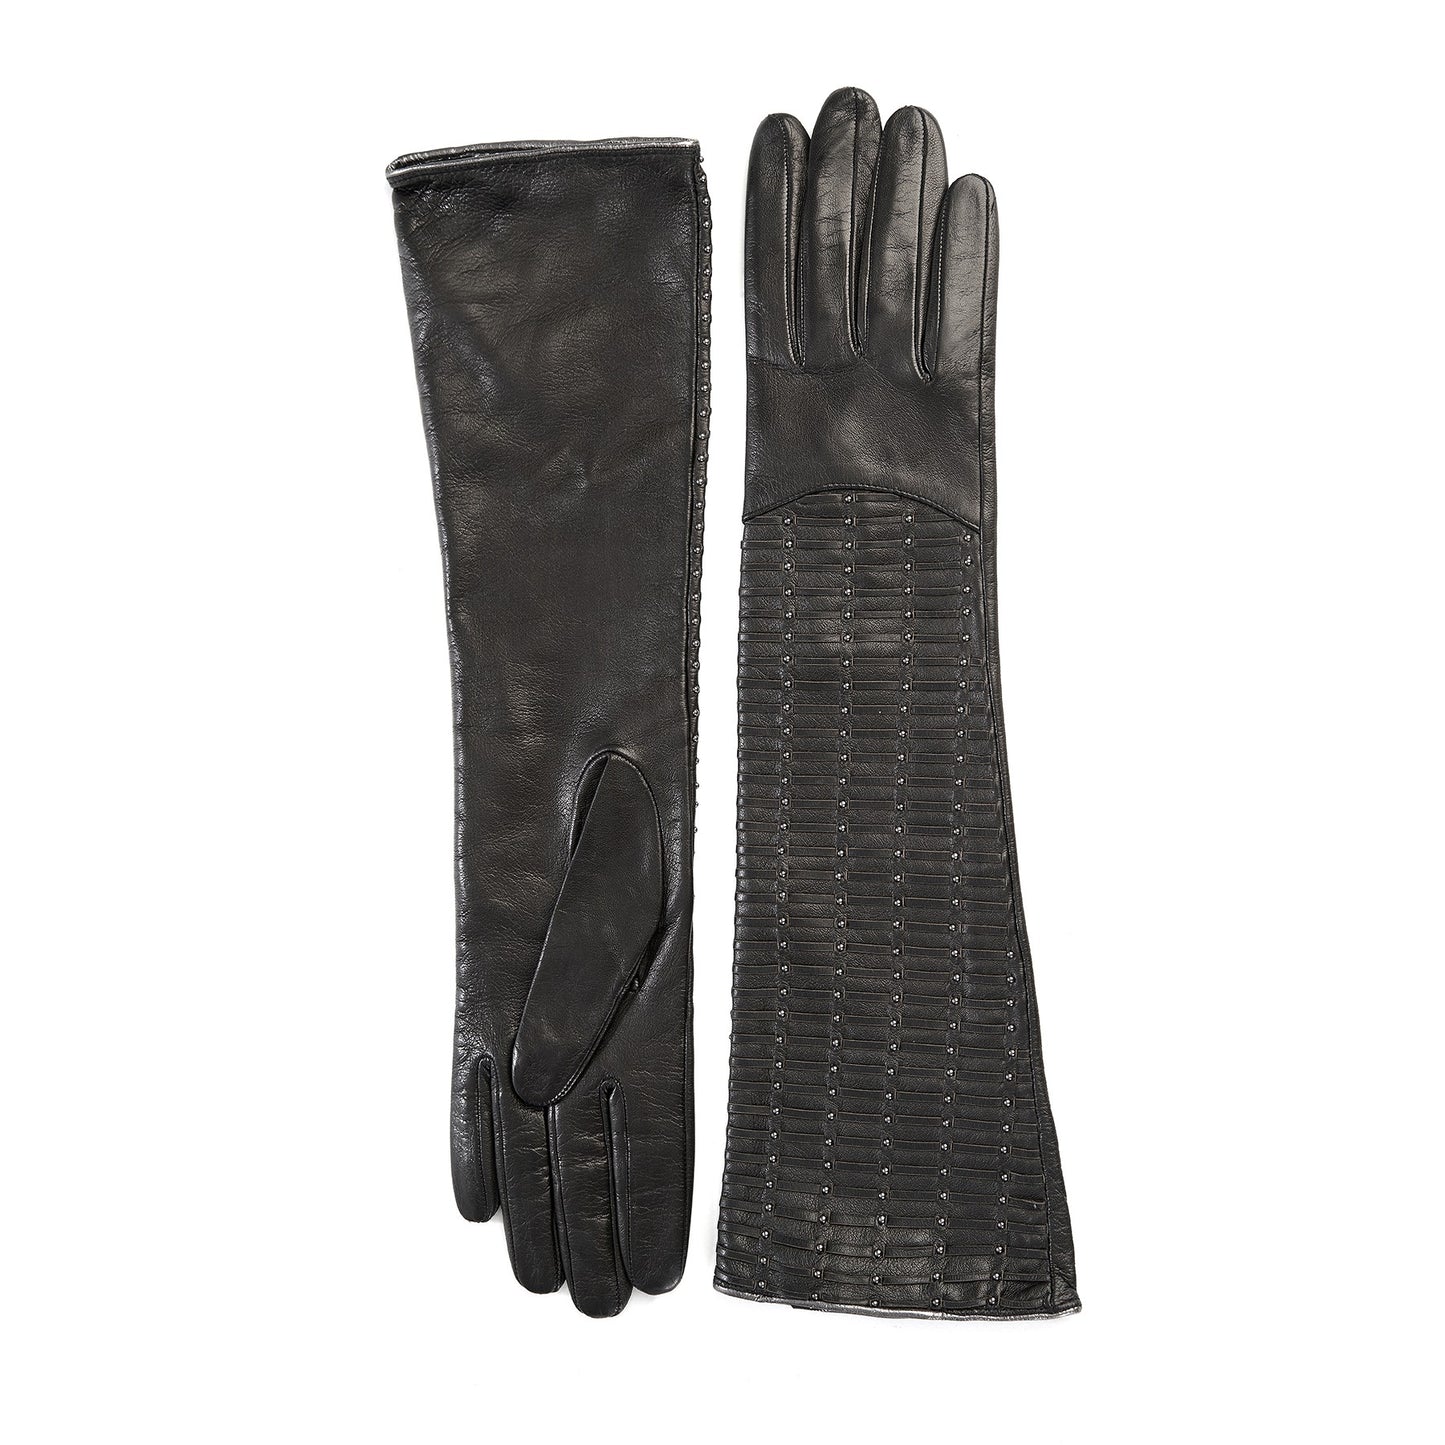 Ladies' long black leather gloves with studs and woven leather handmade